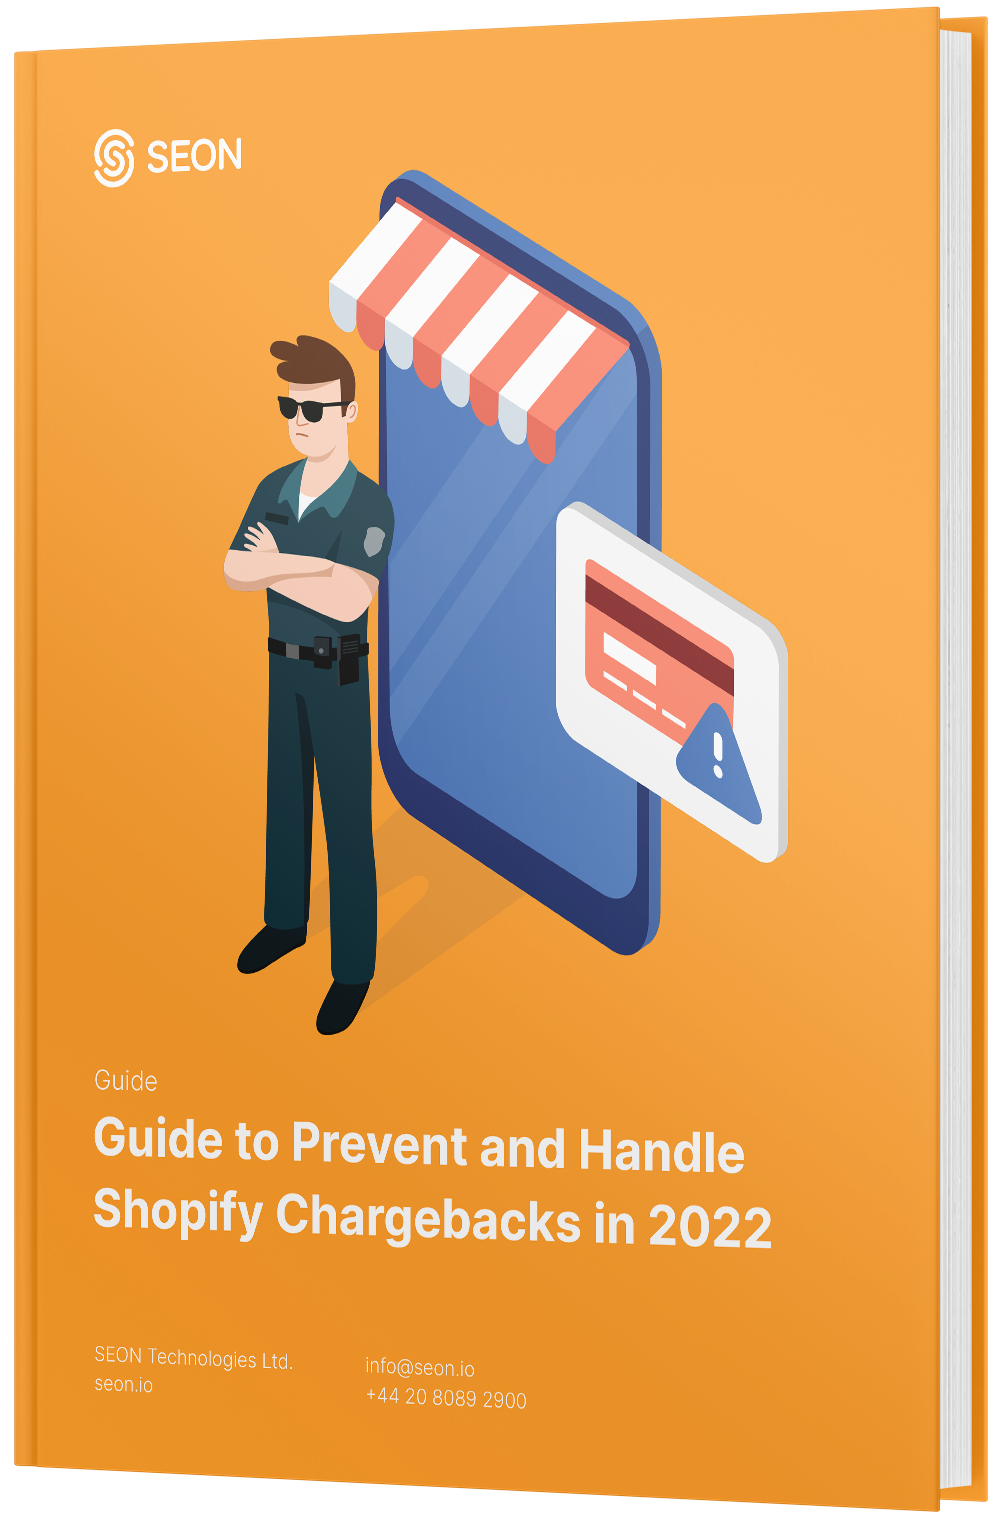 Your Guide to Prevent and Handle Shopify Chargebacks in 2023